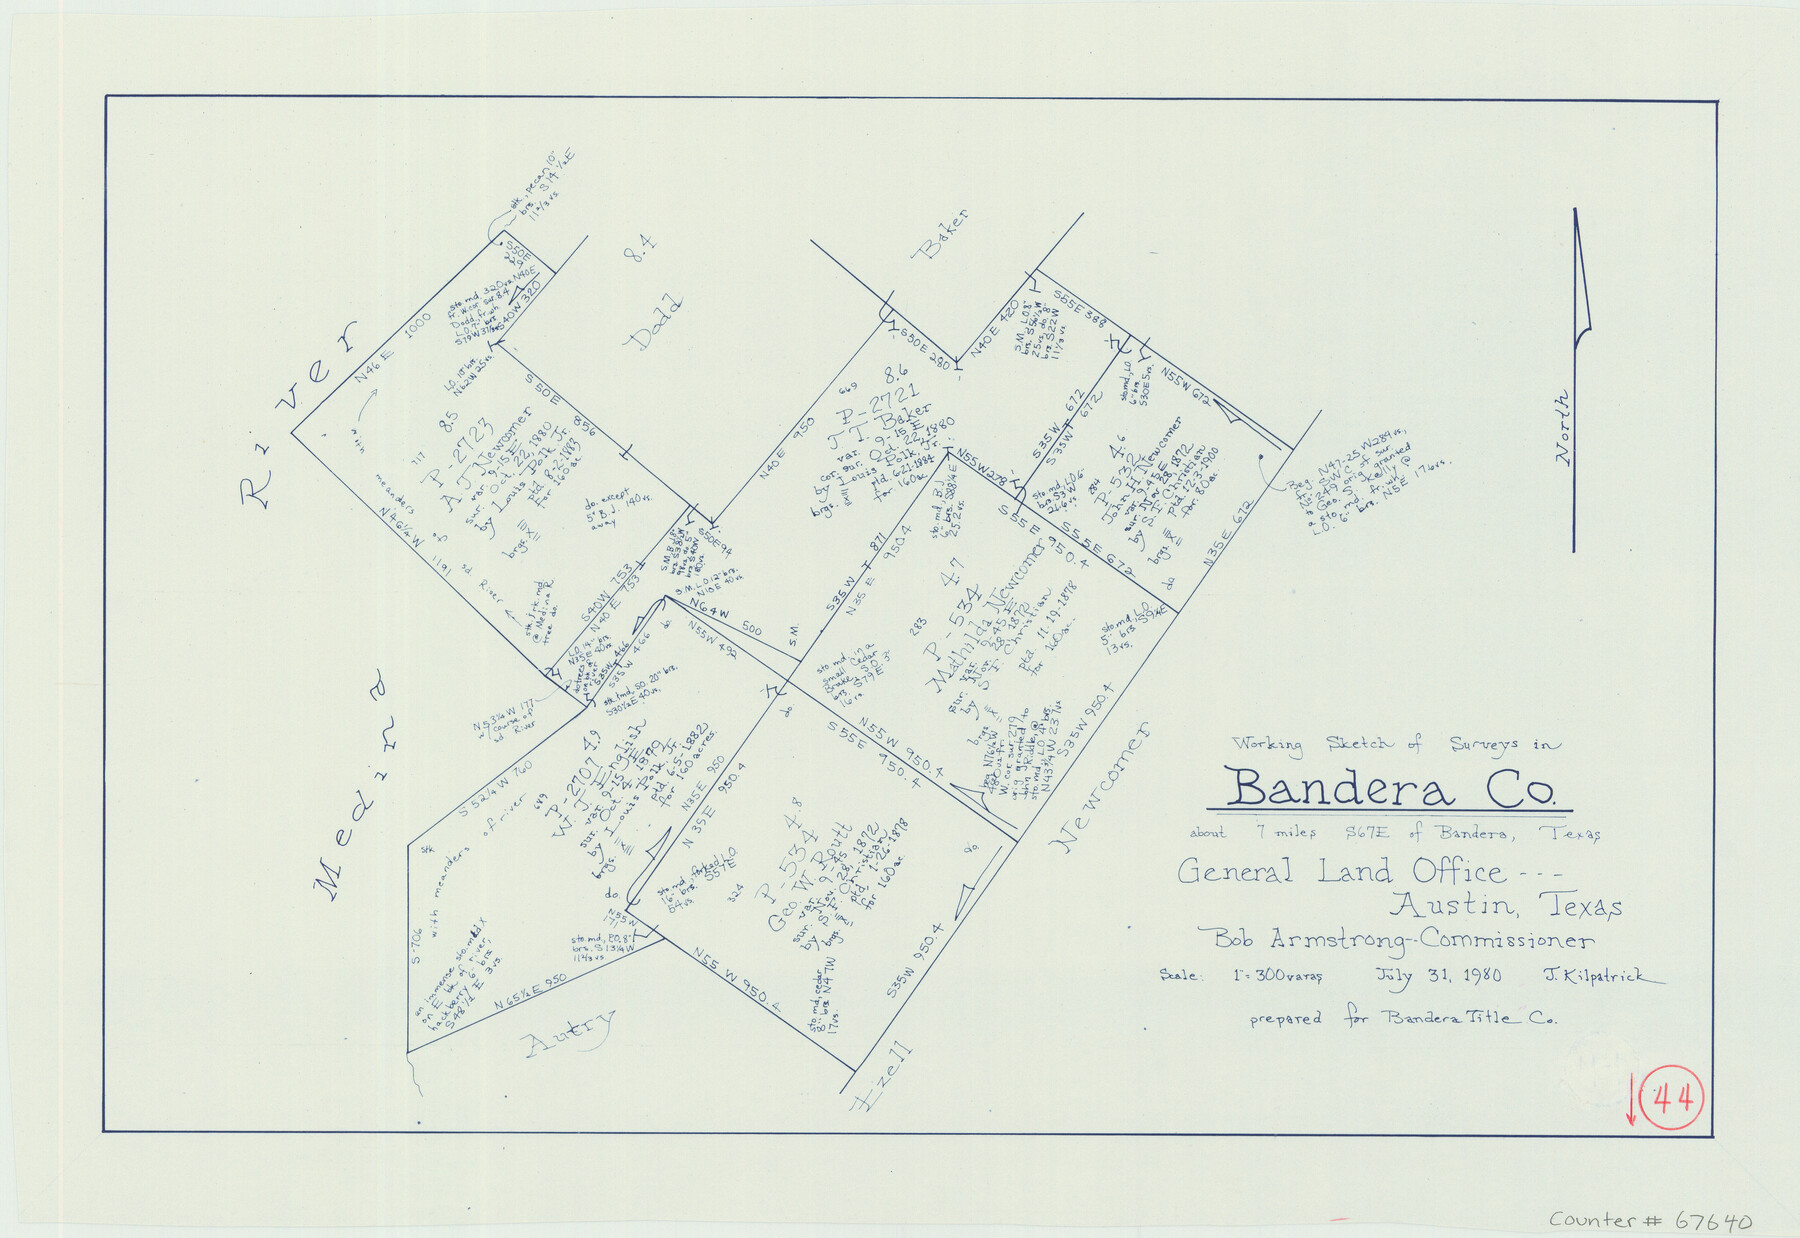 67640, Bandera County Working Sketch 44, General Map Collection